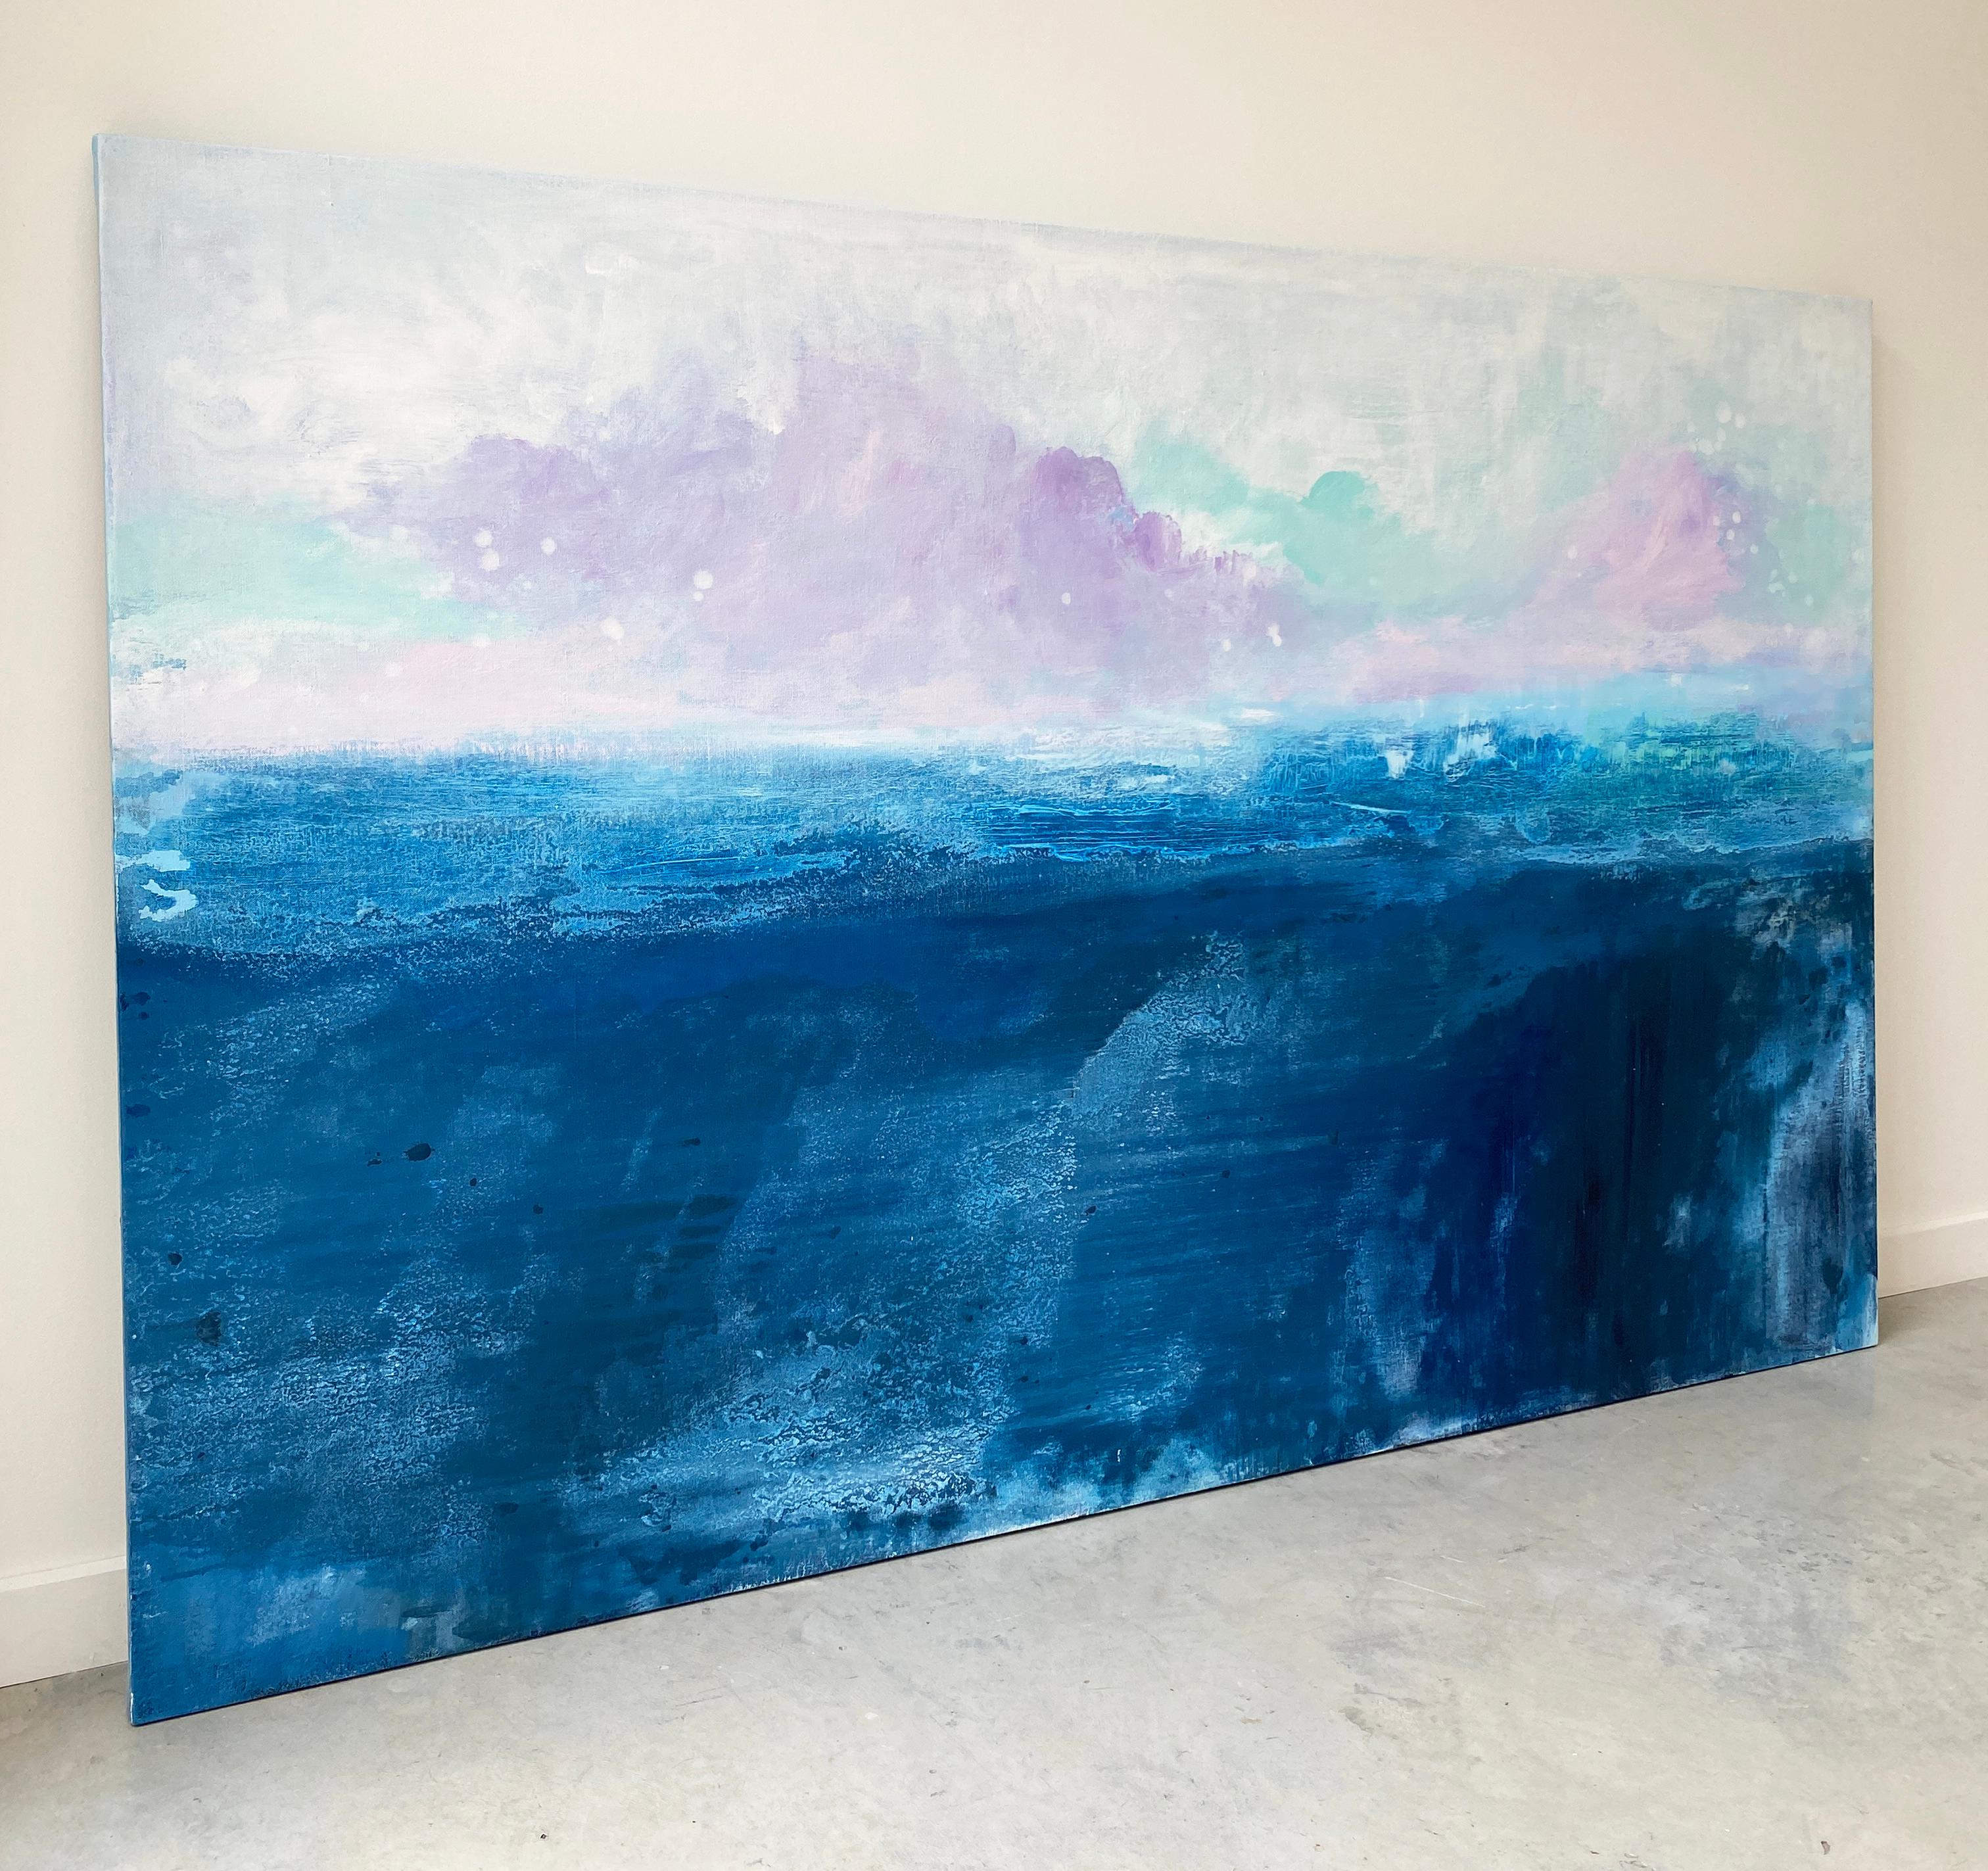 New Horizons is an abstract expressionist collection of original paintings exploring the views of the natural world and the beauty of the vast Australian landscape. Painted on raw French linen with built up layers of paint revealing ghostly